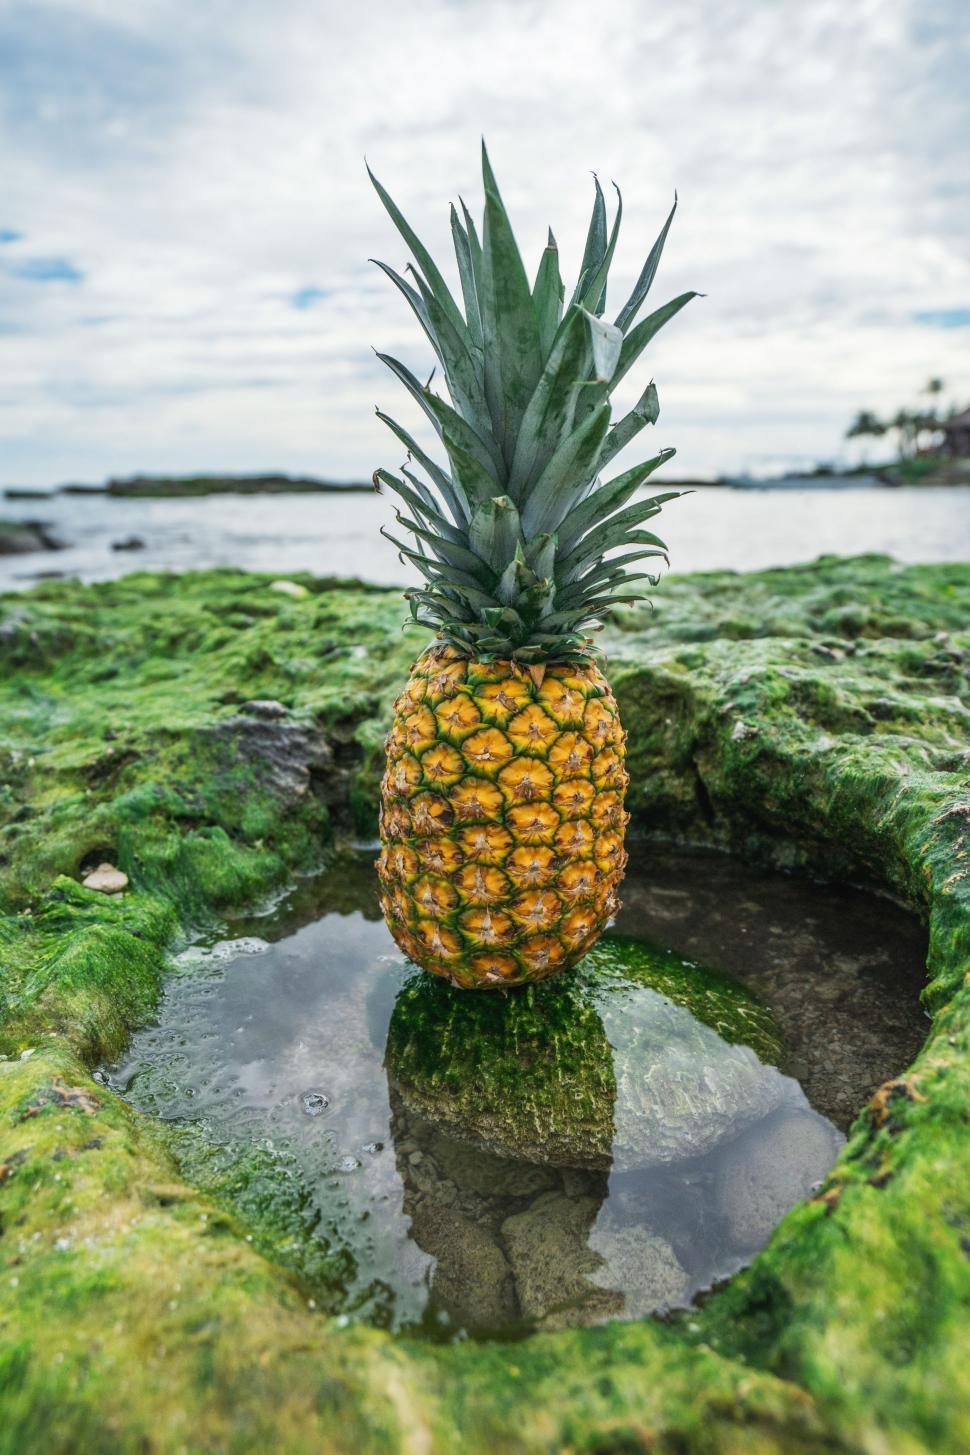 Free Image of Pineapple on Water Puddle 